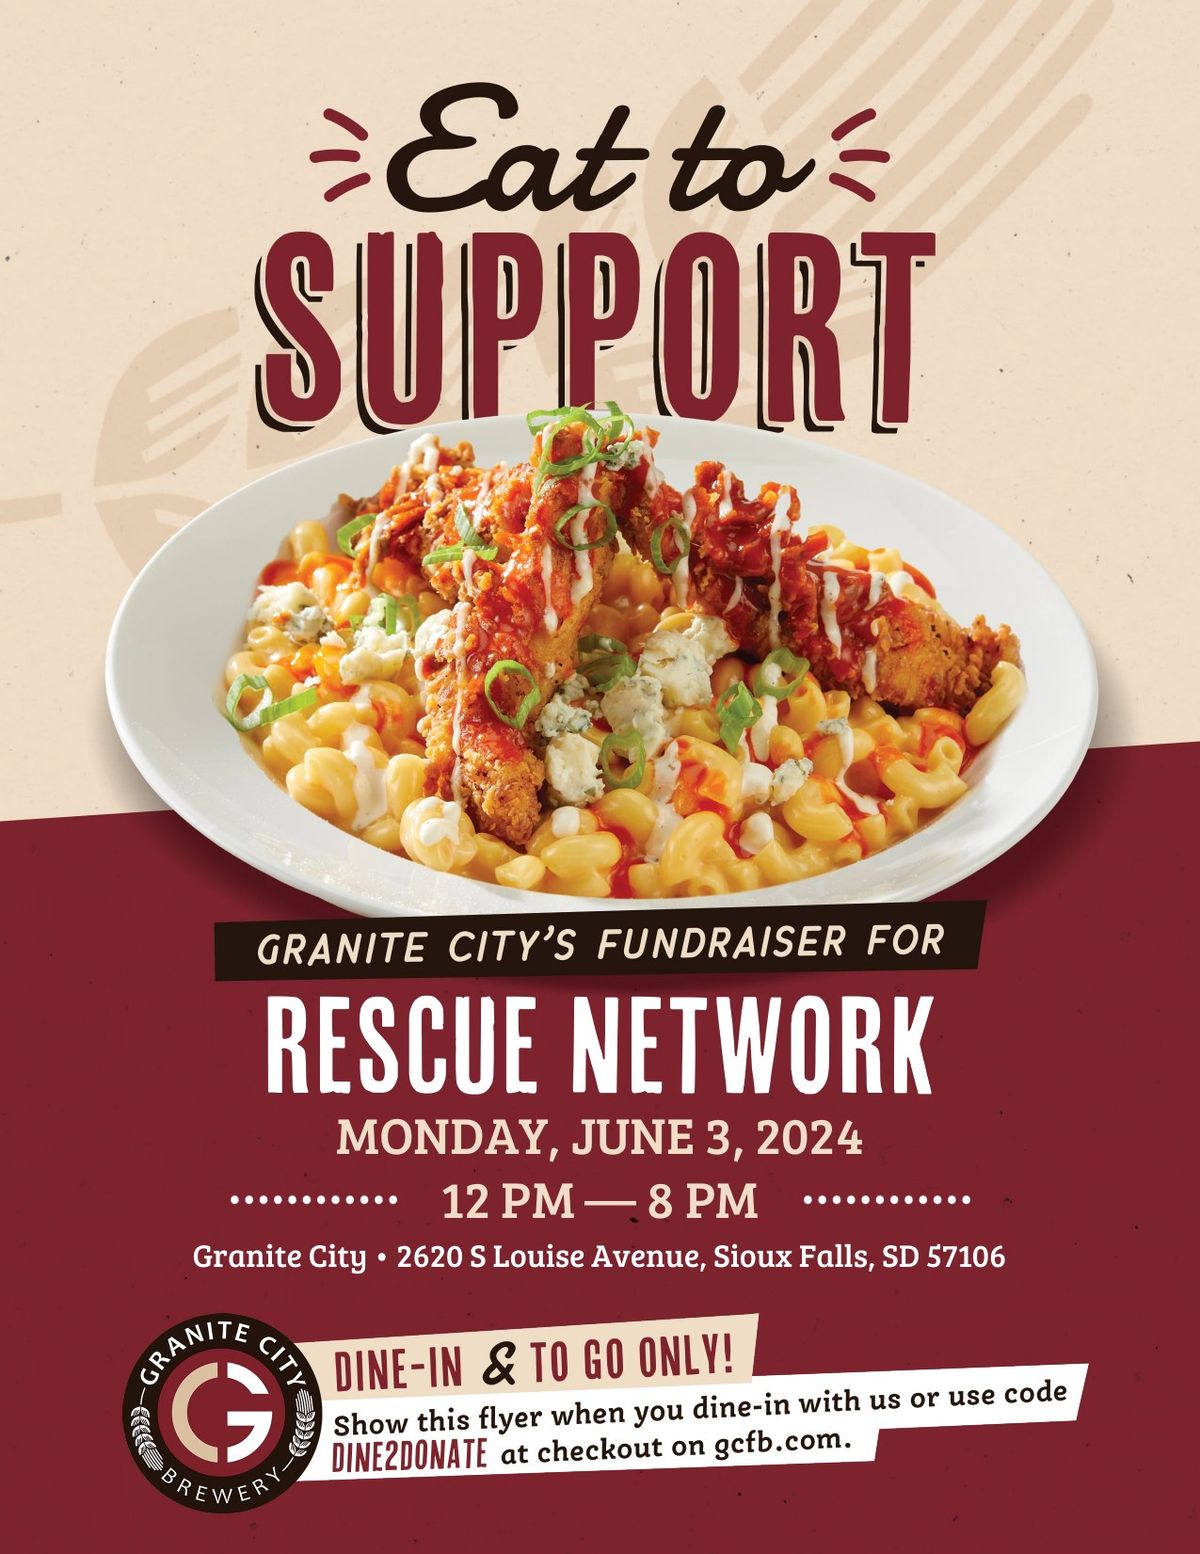 Eat to Support Rescue Network at Granite City!